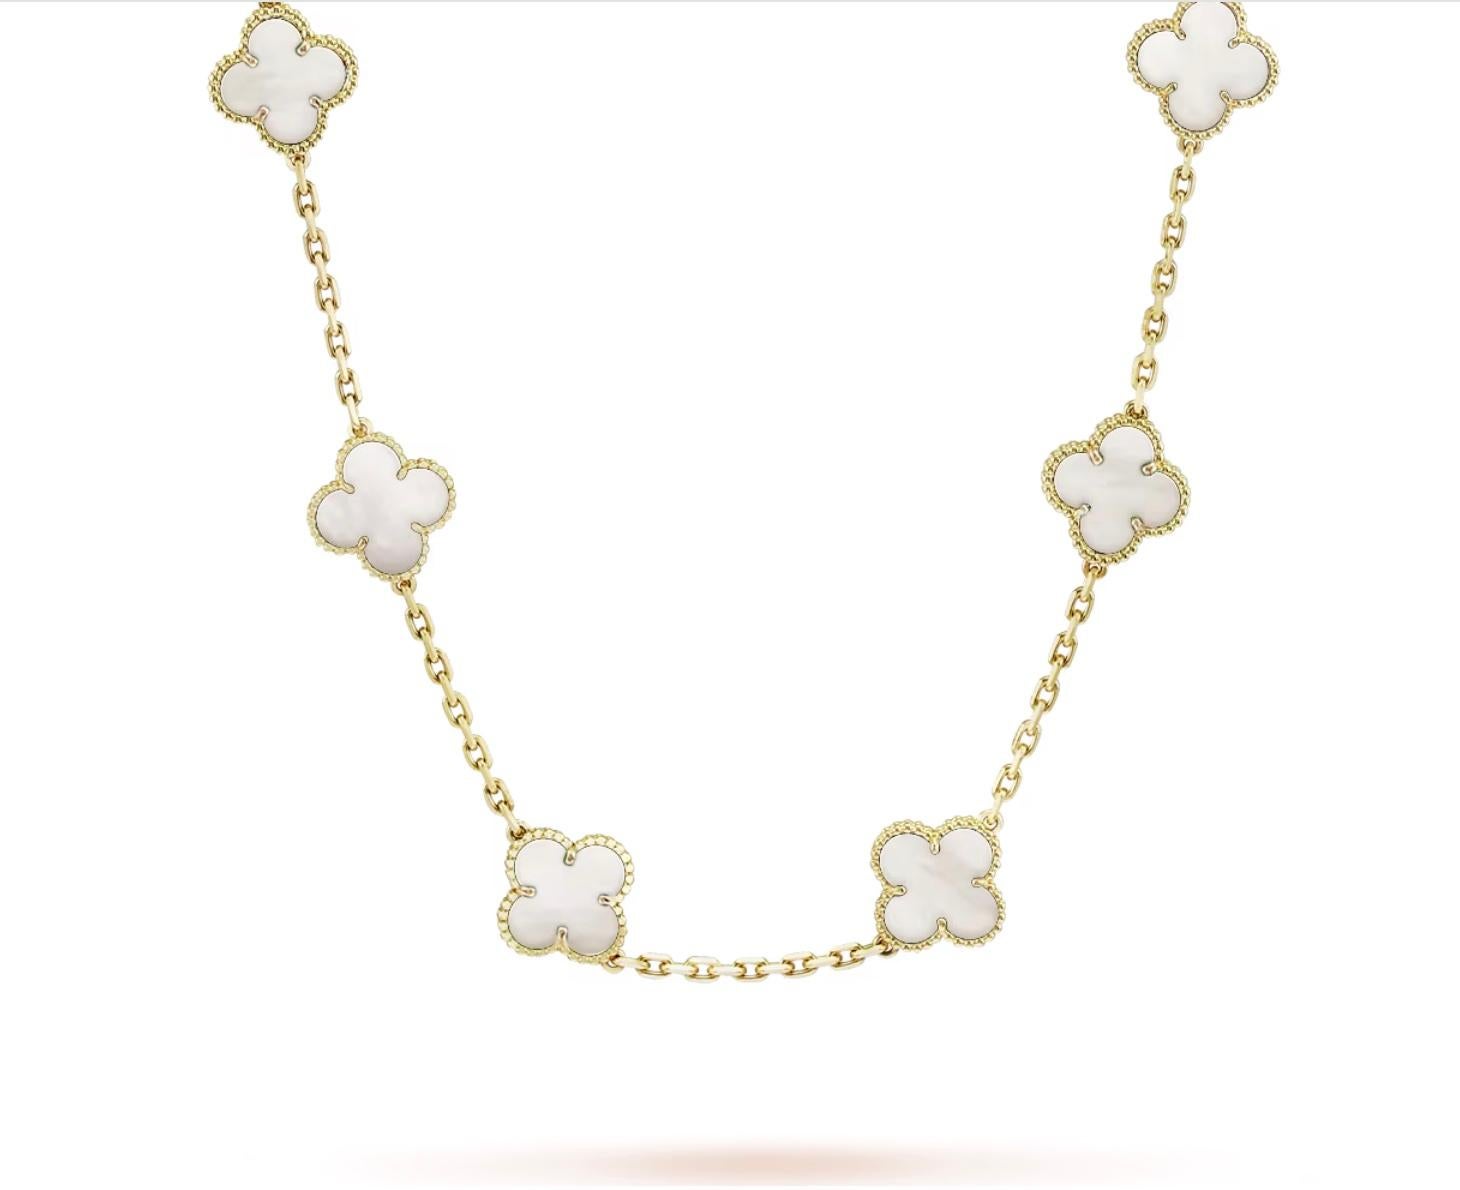 Van Cleef and Arpels Vintage Alhambra long necklace, 20 motifs, 18K yellow gold, white mother-of-pearl.

Signed, numbered and marked.
Original document from Van Cleef and Arpels. Purchased at the Van Cleef and Arpels boutique in GENEVE,